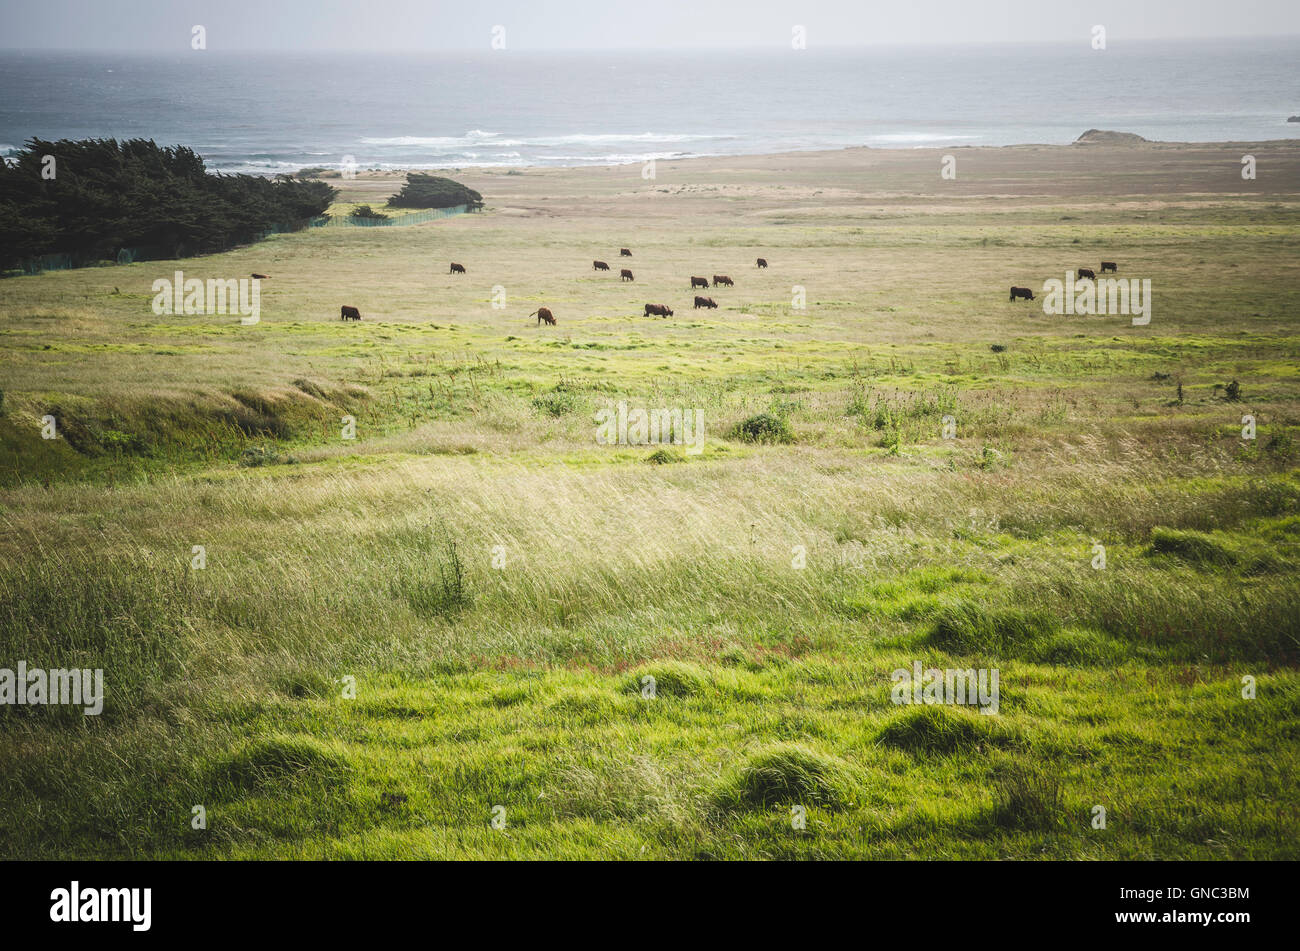 Cows Grazing in Field near Point Sur, Big Sur, Monterey County, California, USA Stock Photo